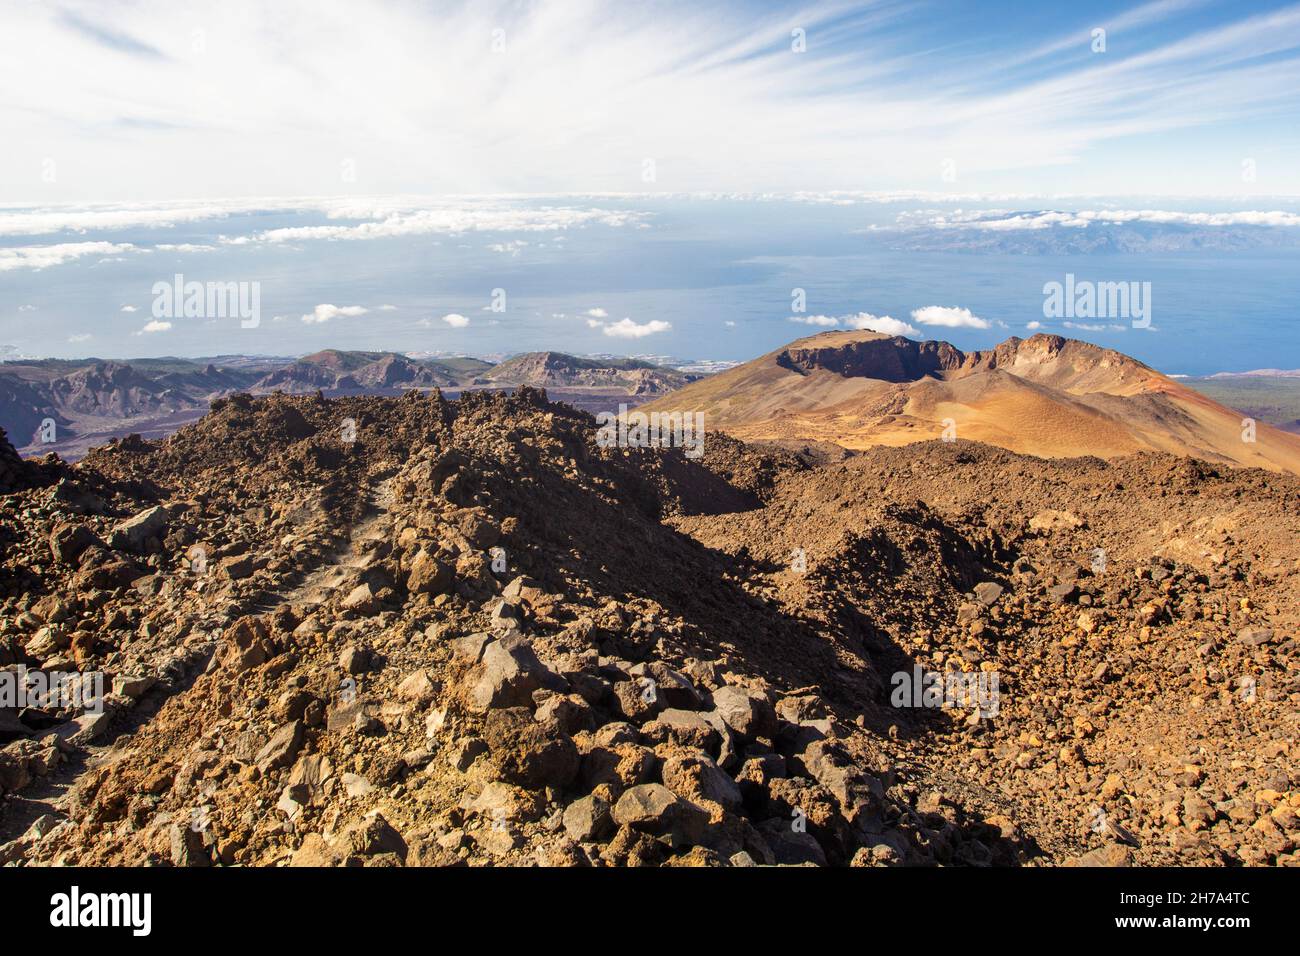 Crater of Pico Viejo seen from Mount Teide. Teide National Park, Tenerife, Canary Islands, Spain. Stock Photo